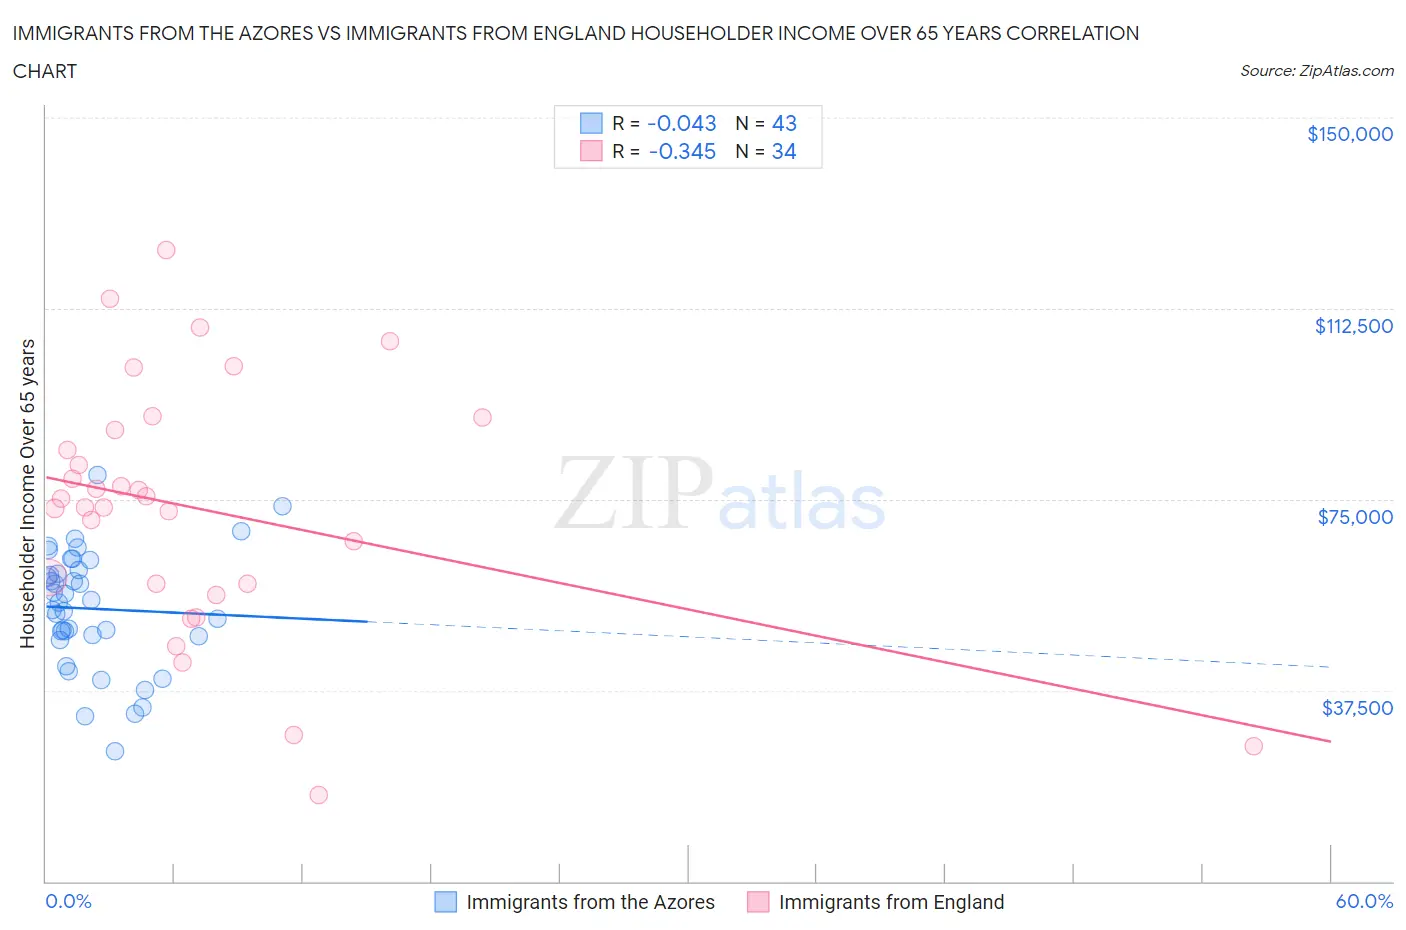 Immigrants from the Azores vs Immigrants from England Householder Income Over 65 years